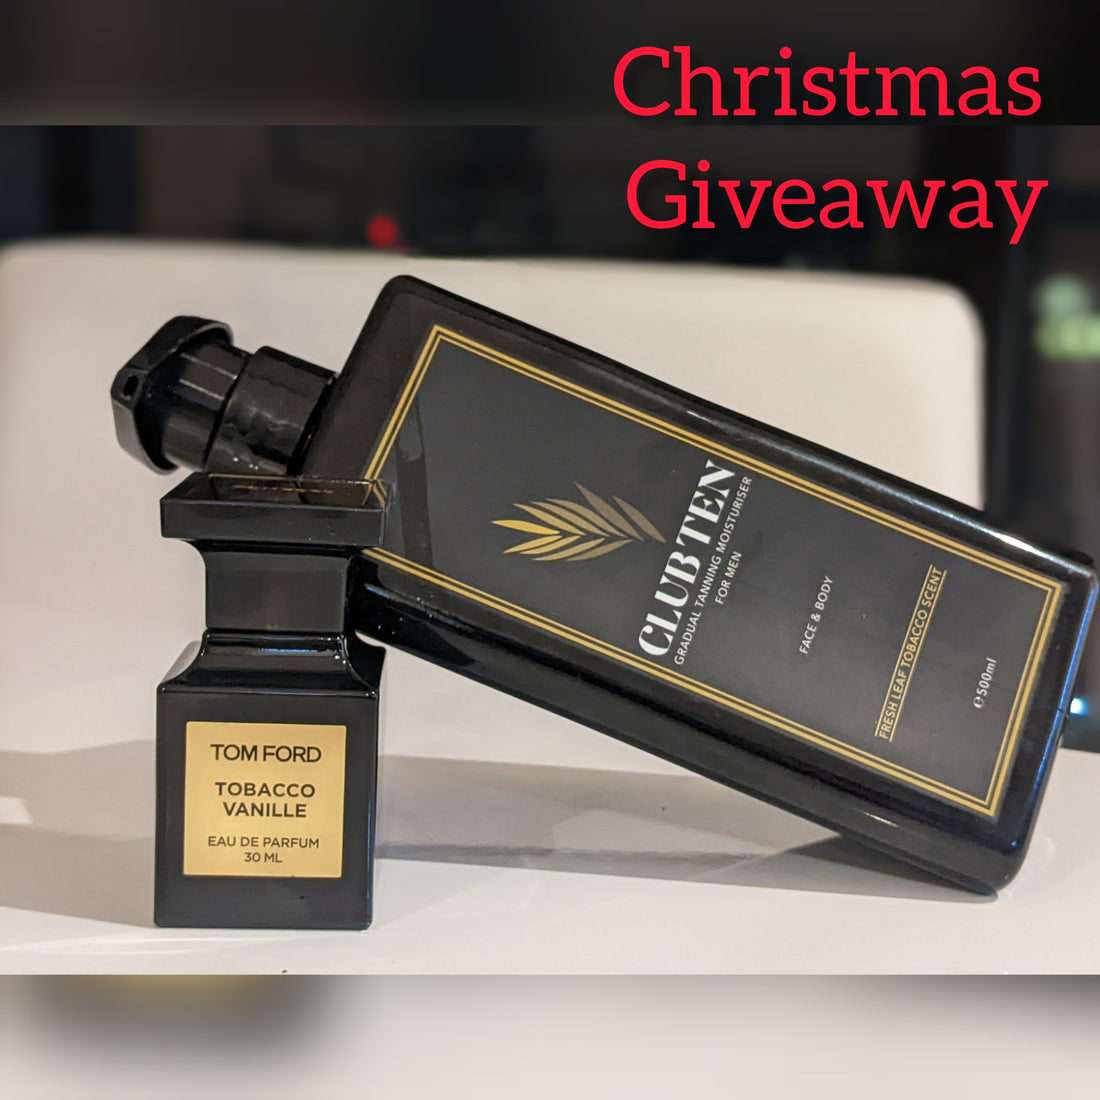 Christmas Giveaway - £140 Prize to be Won!